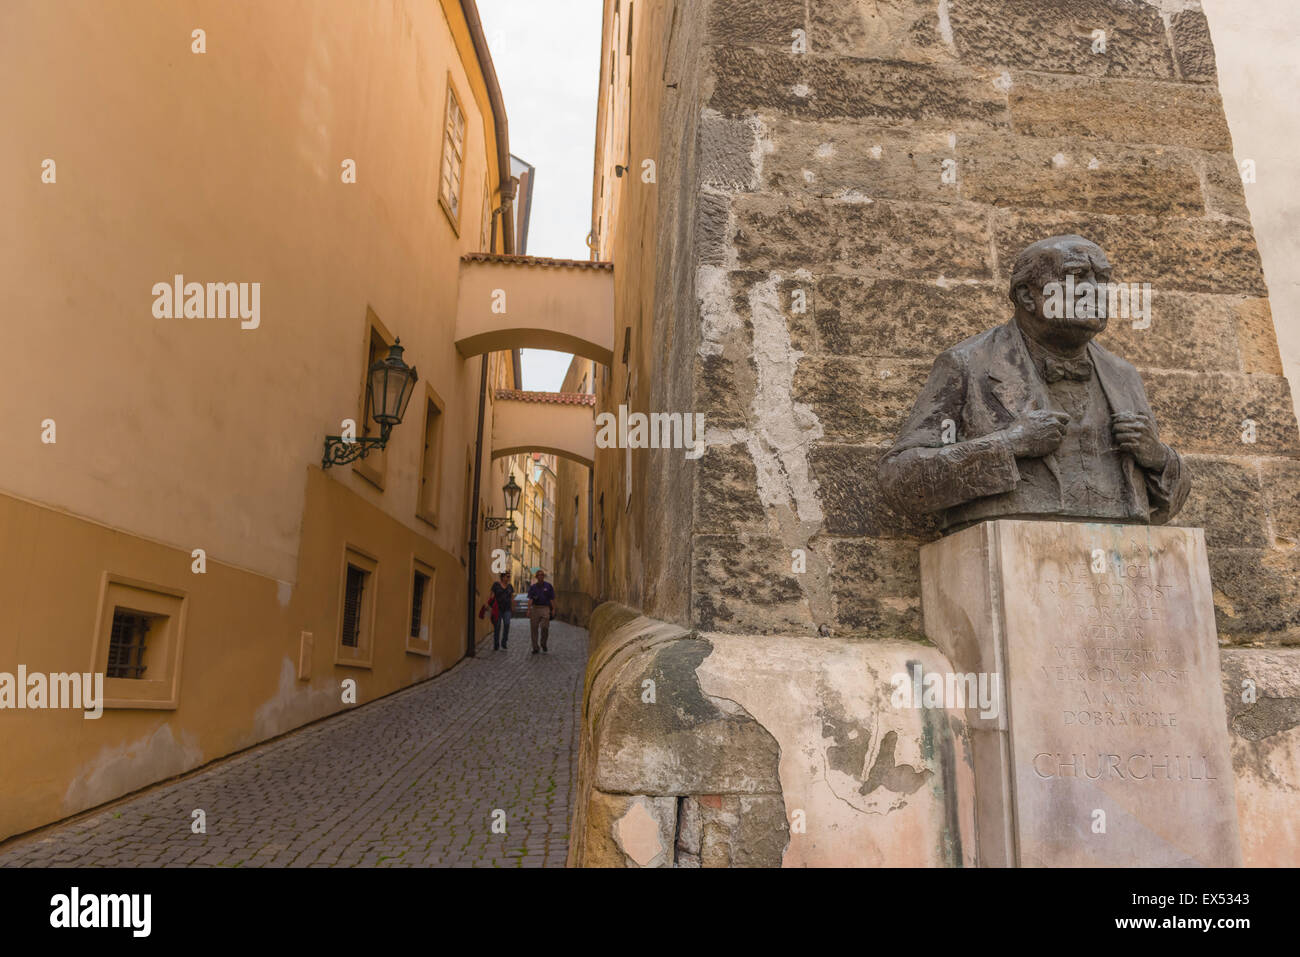 Churchill statue,sculpture, a bust of British Prime Minister Winston Churchill in the castle district (Hradcany) of Prague, Czech Republic. Stock Photo